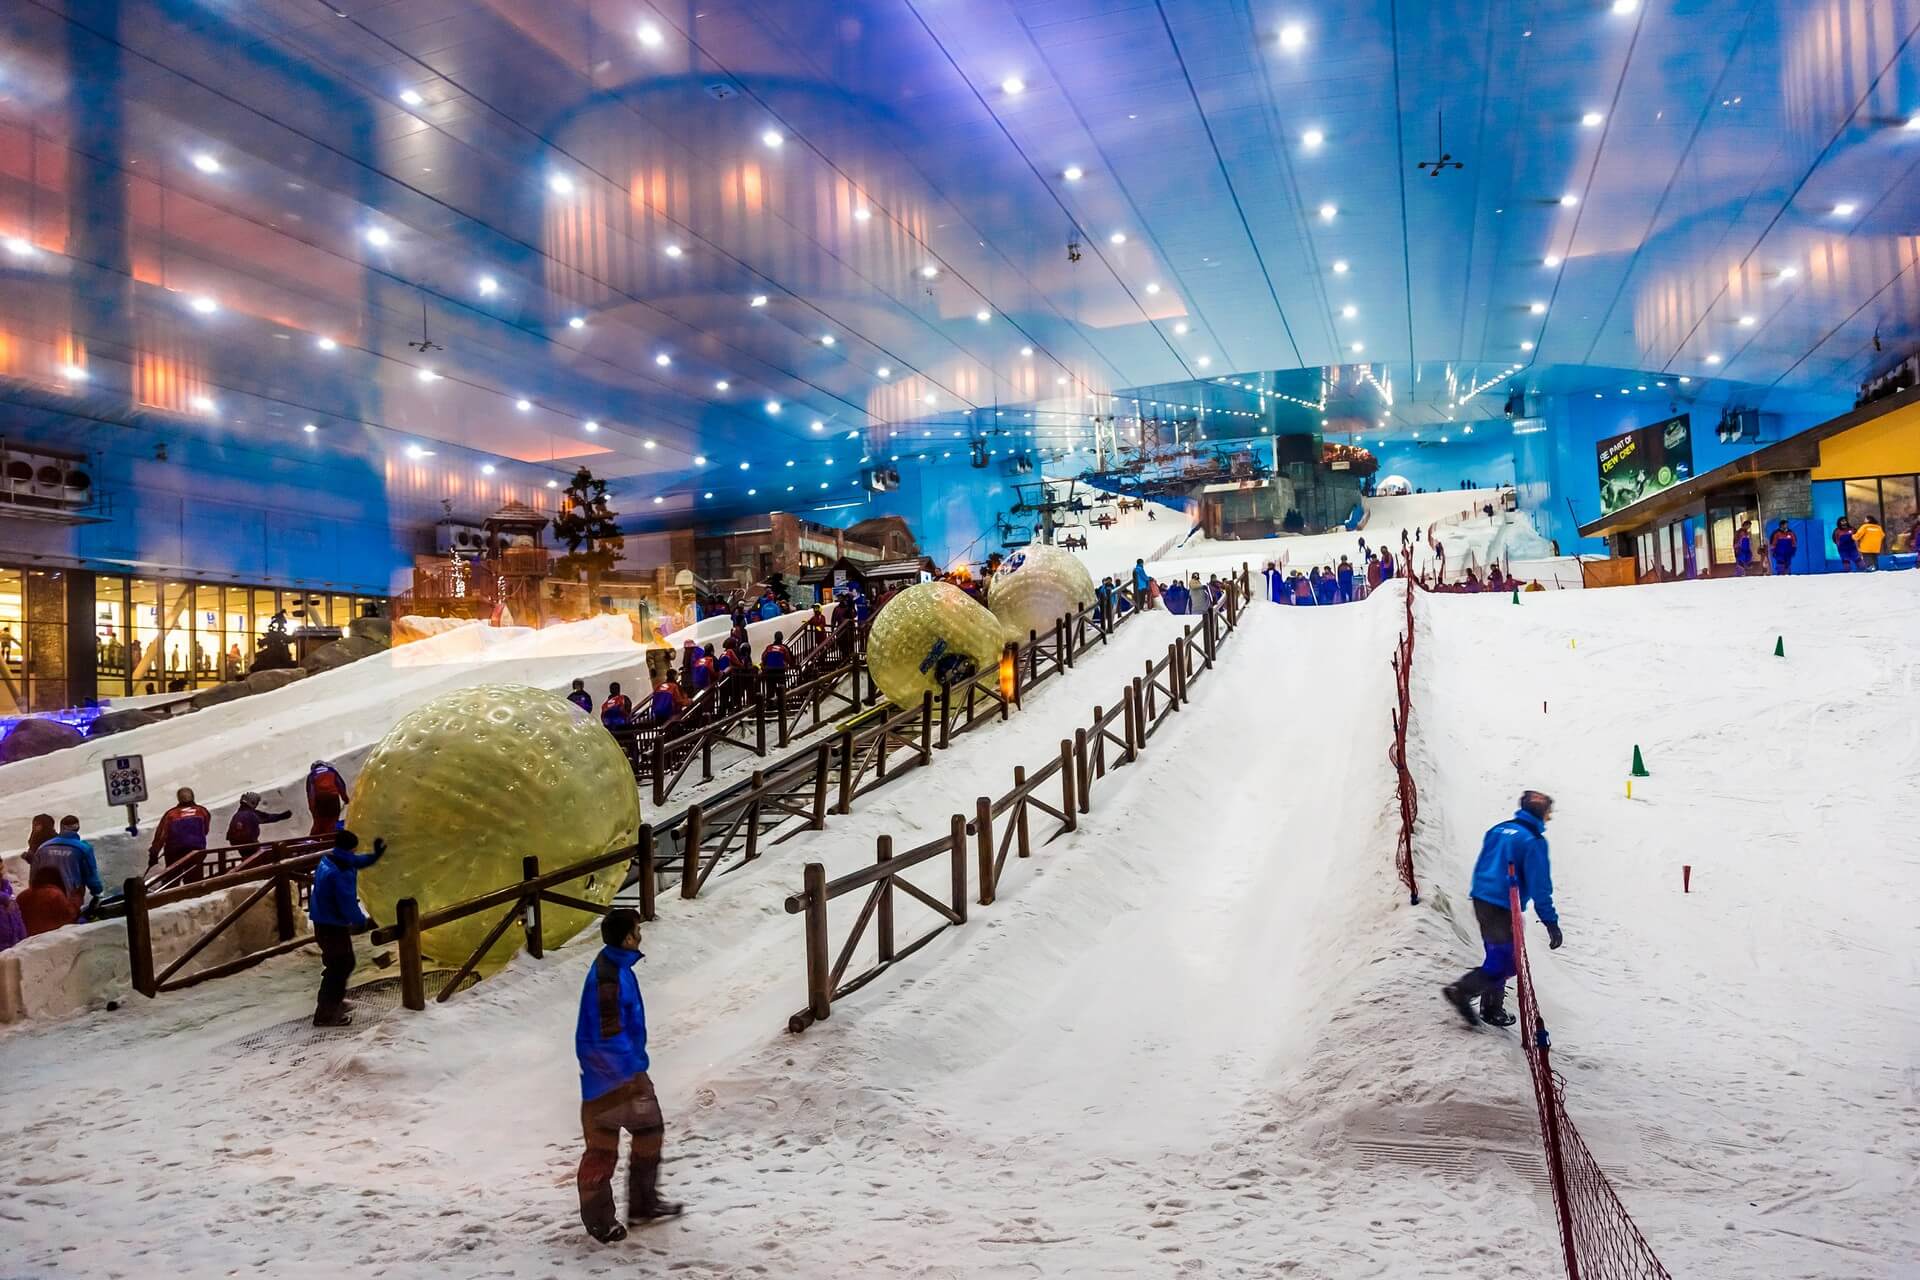 DUBAI, UAE - APRIL 6: Ski on April 6, 2013 in Dubai. Ski Dubai--is an indoor ski resort with 22,500 square meters of indoor ski area. It is a part of the Mall of the Emirates
